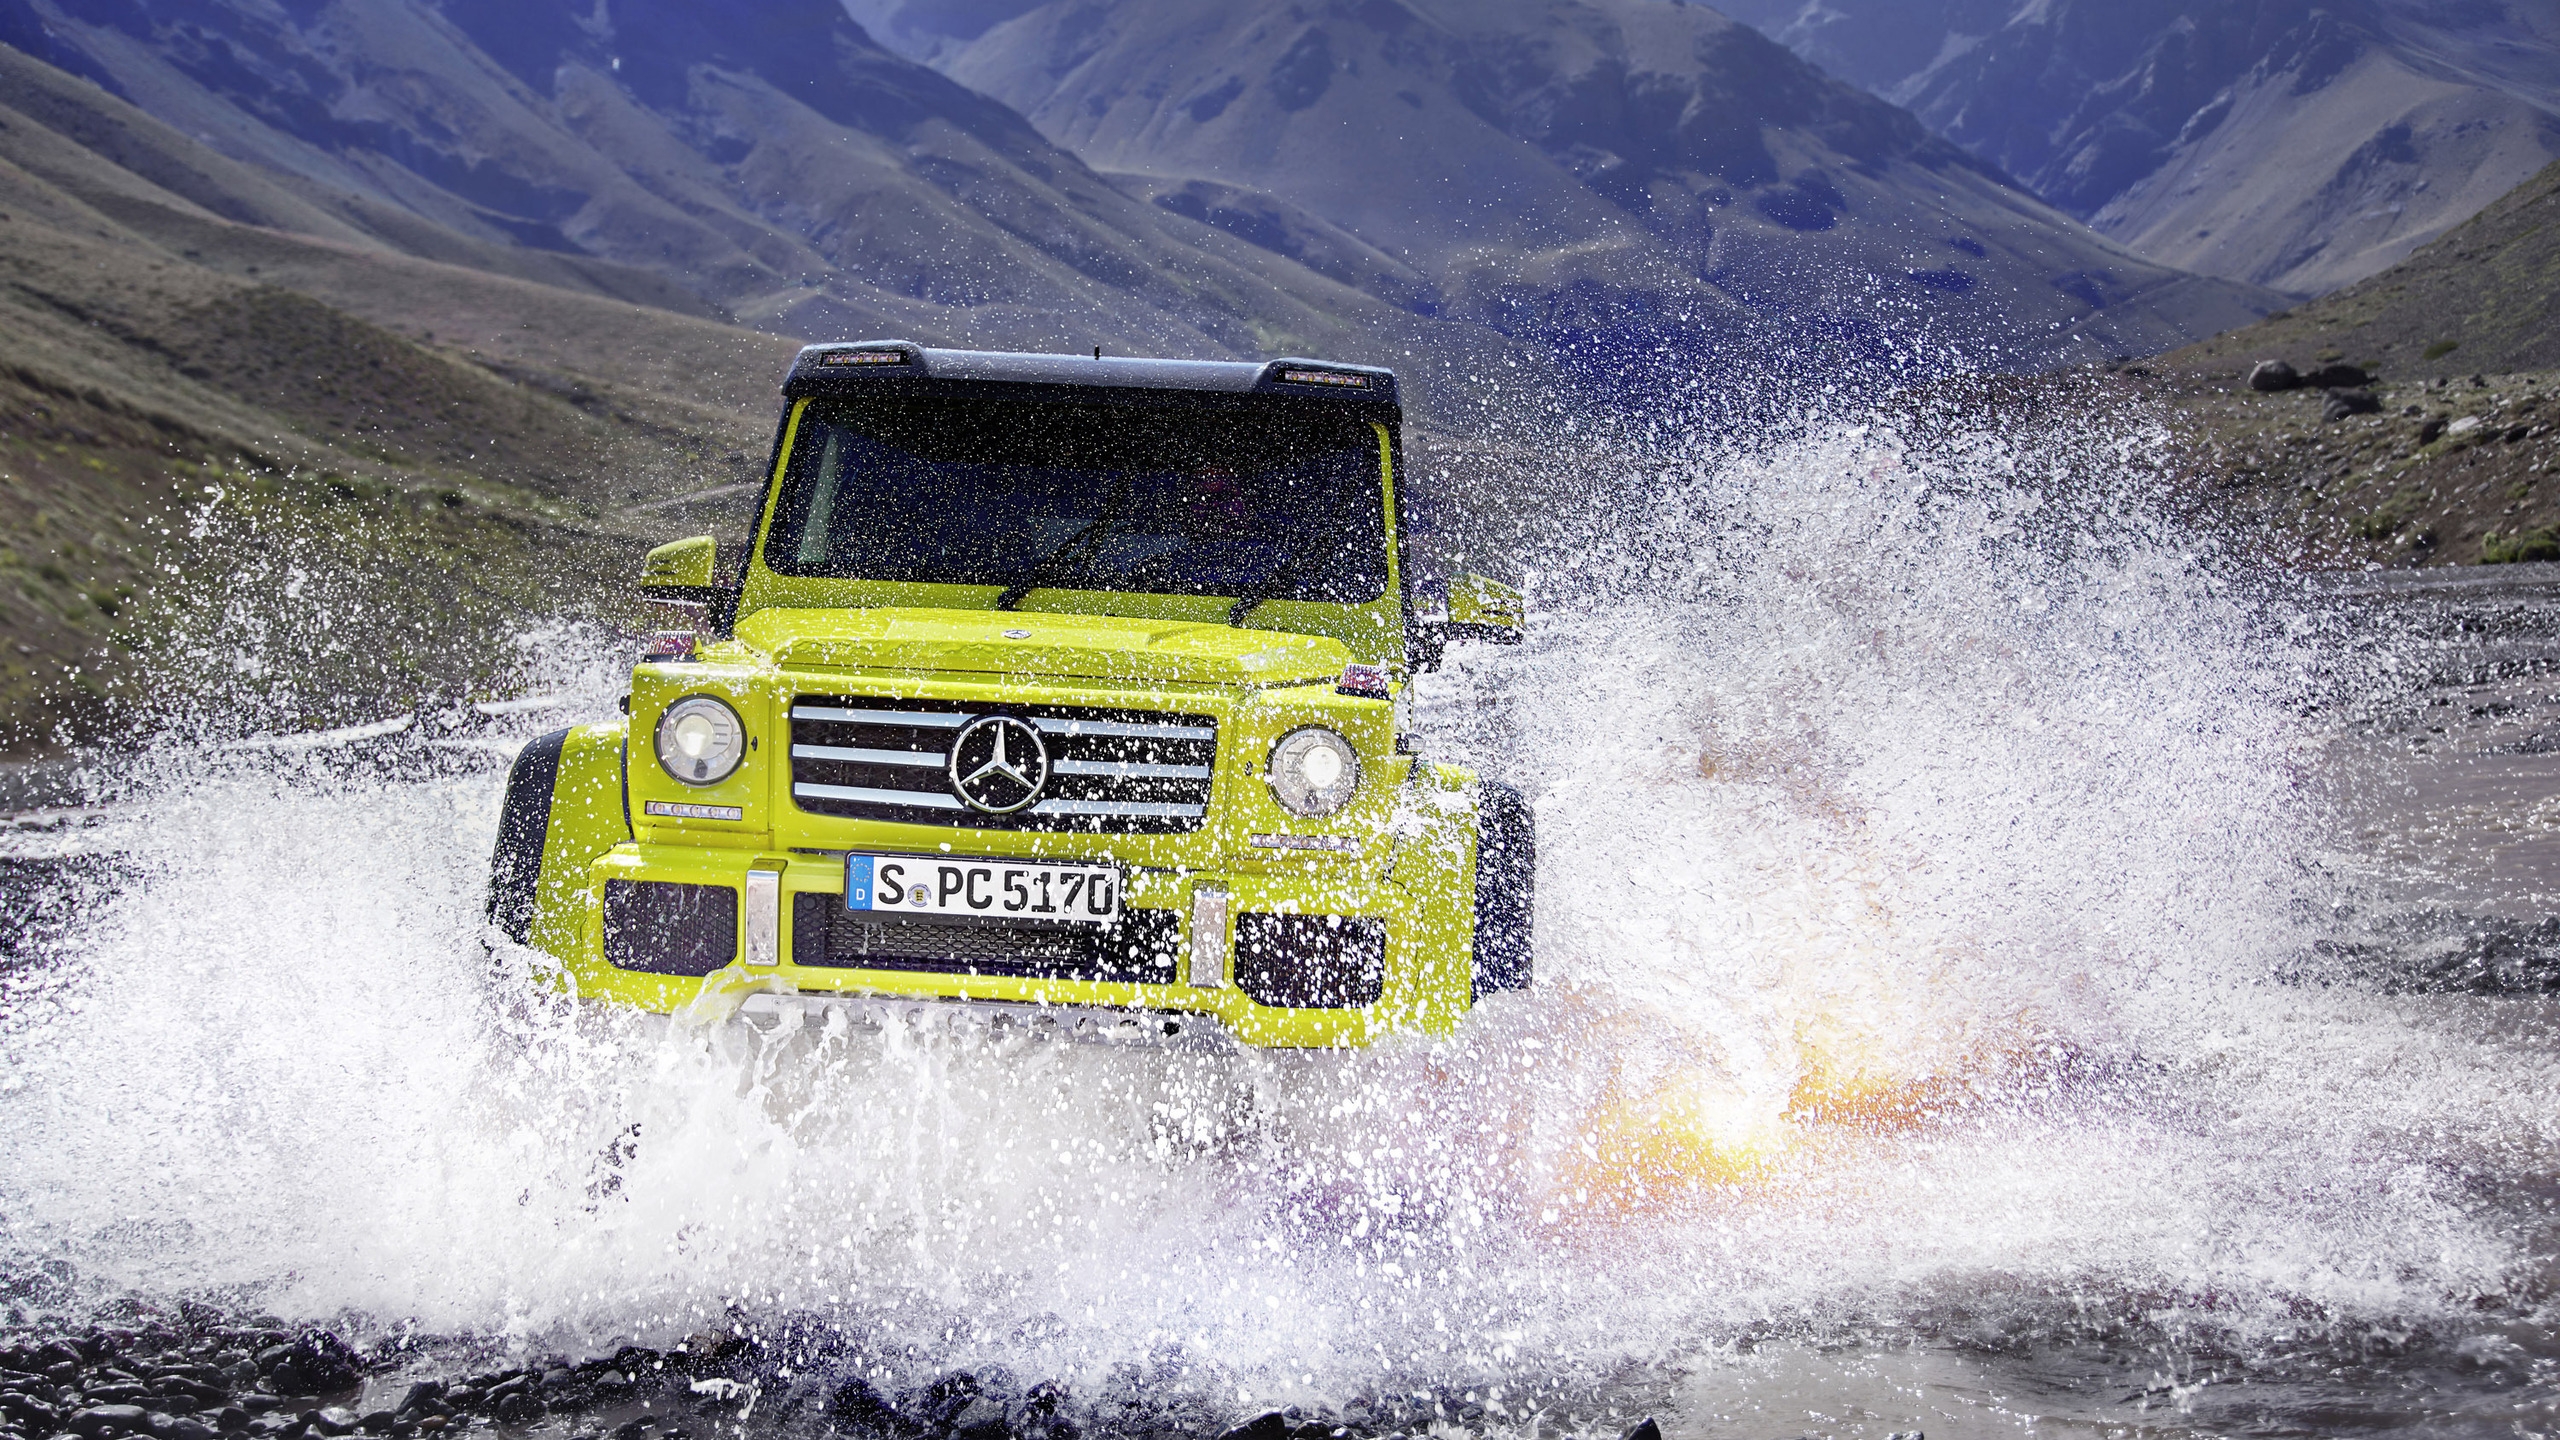 Mercedes Benz G500 2015 Off Road for 2560x1440 HDTV resolution